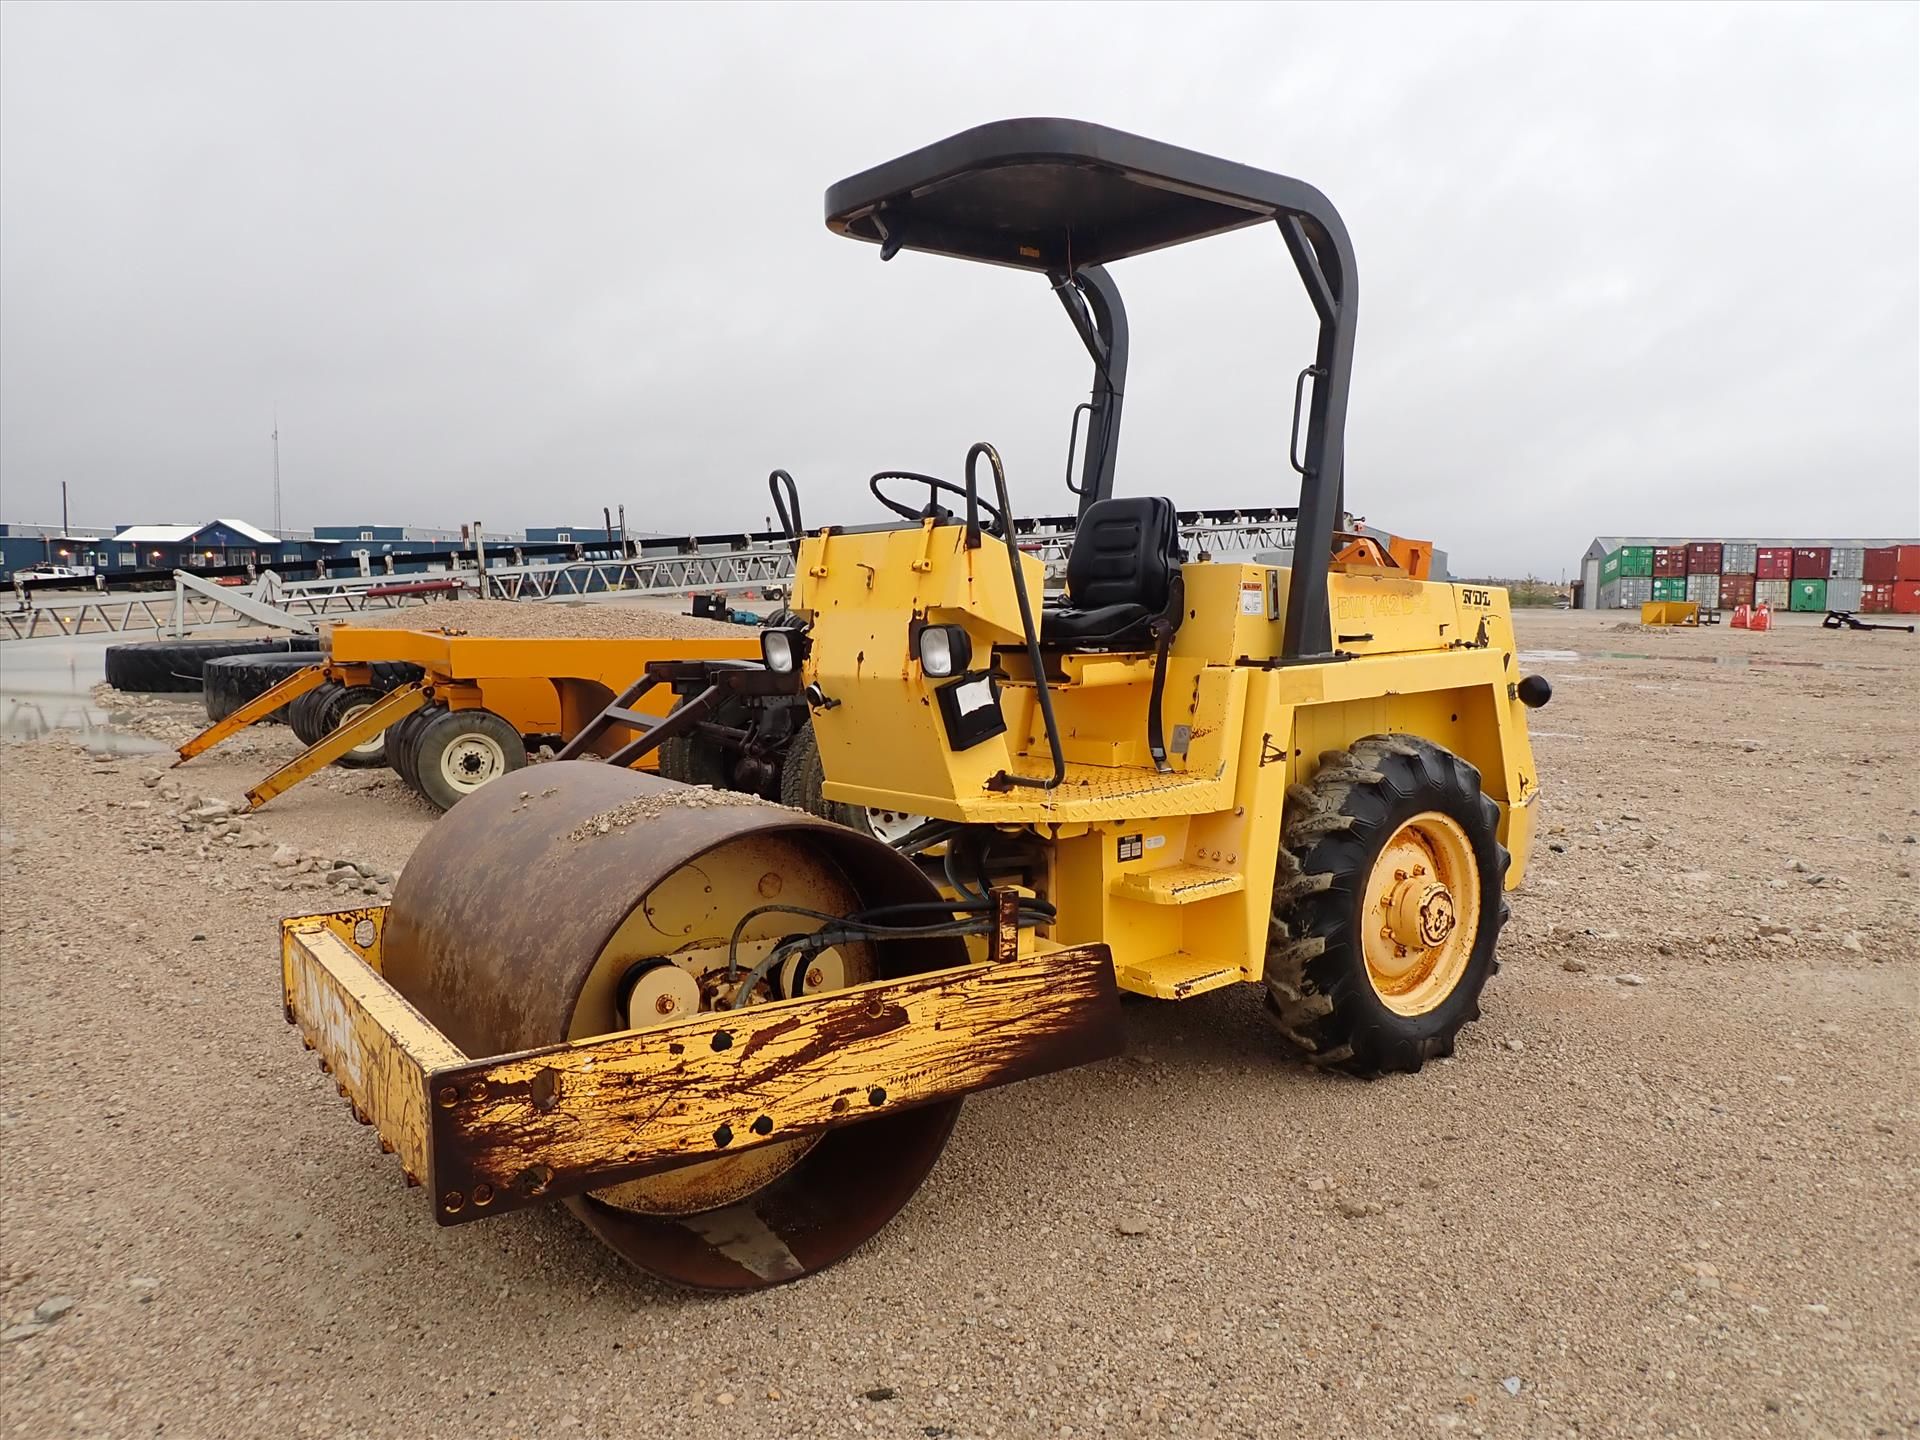 Bomag Smooth Drum Vibratory Compactor, mod. BW142D-2, ser. no. 136510121082, 2826 hrs., 56 in. - Image 2 of 10